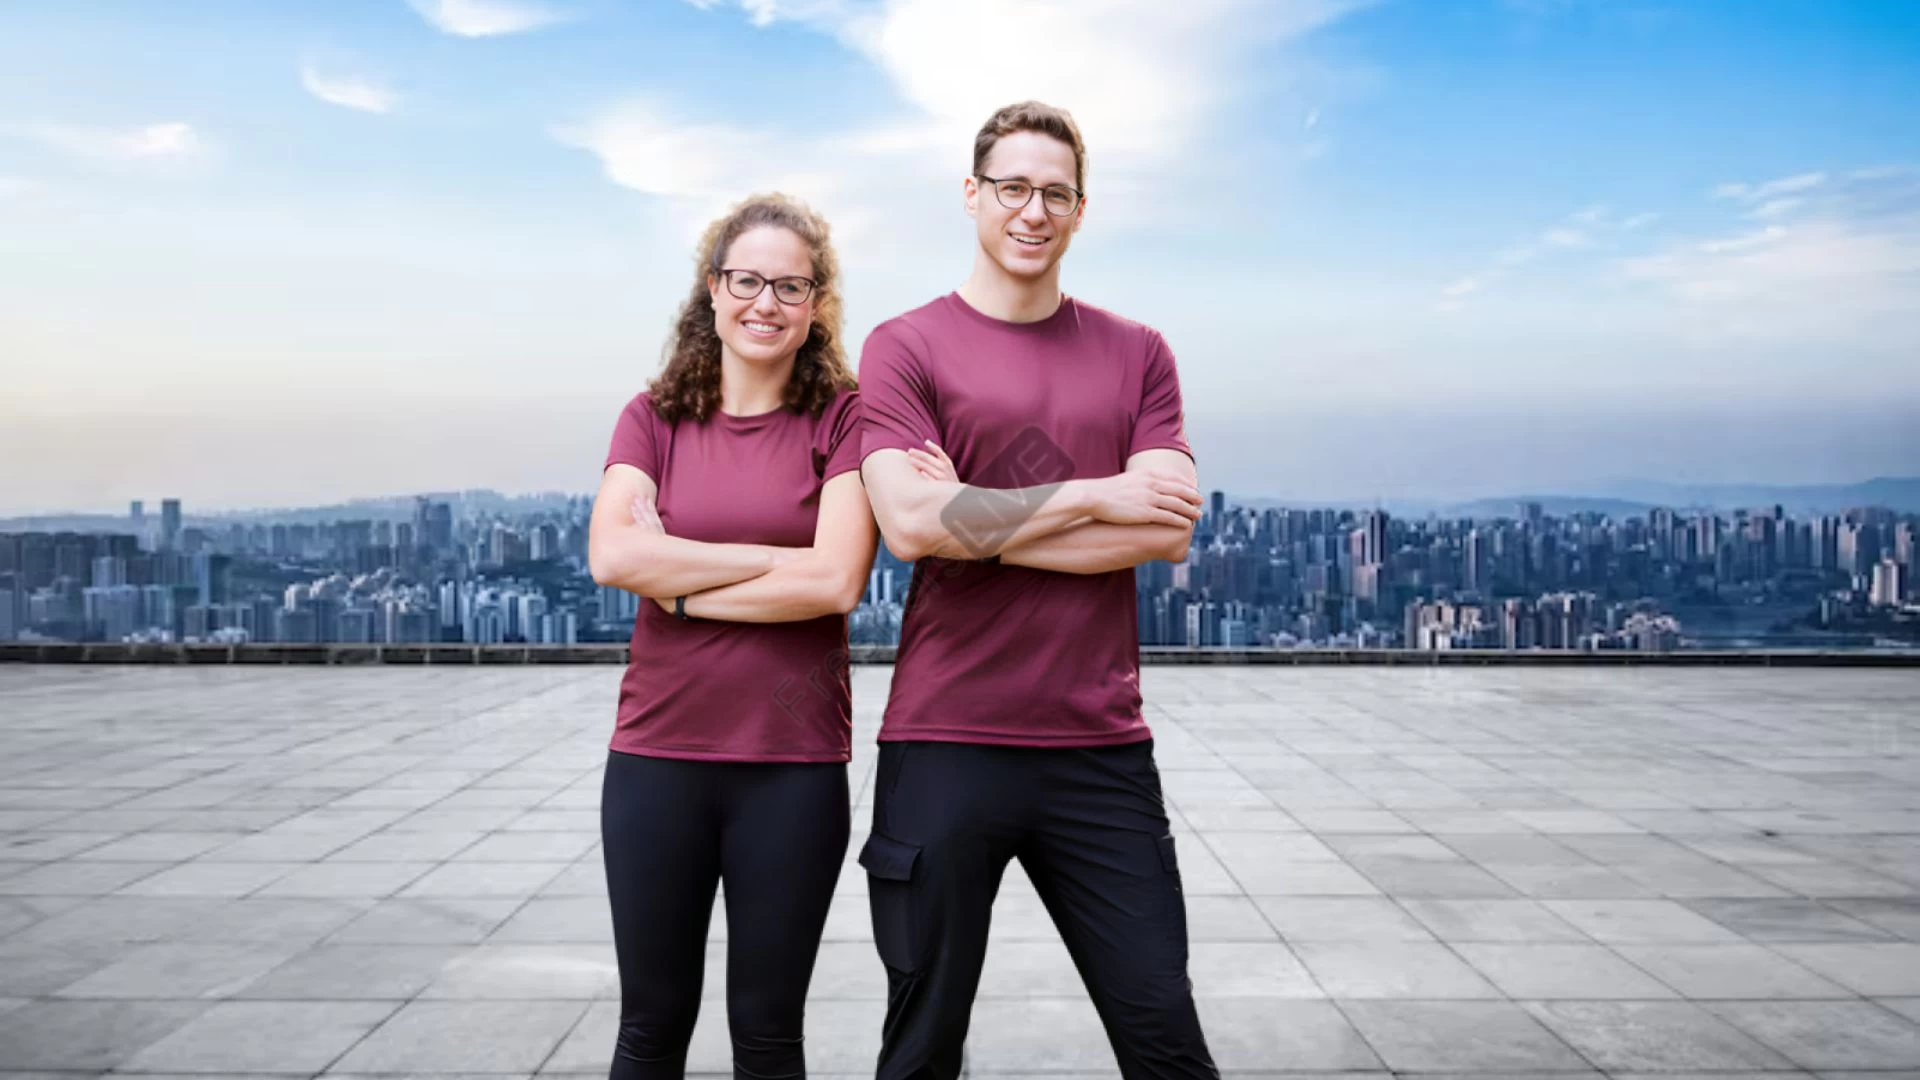 The Amazing Race Season 35 Episode 3 Release Date and Time, Countdown, When is it Coming Out?